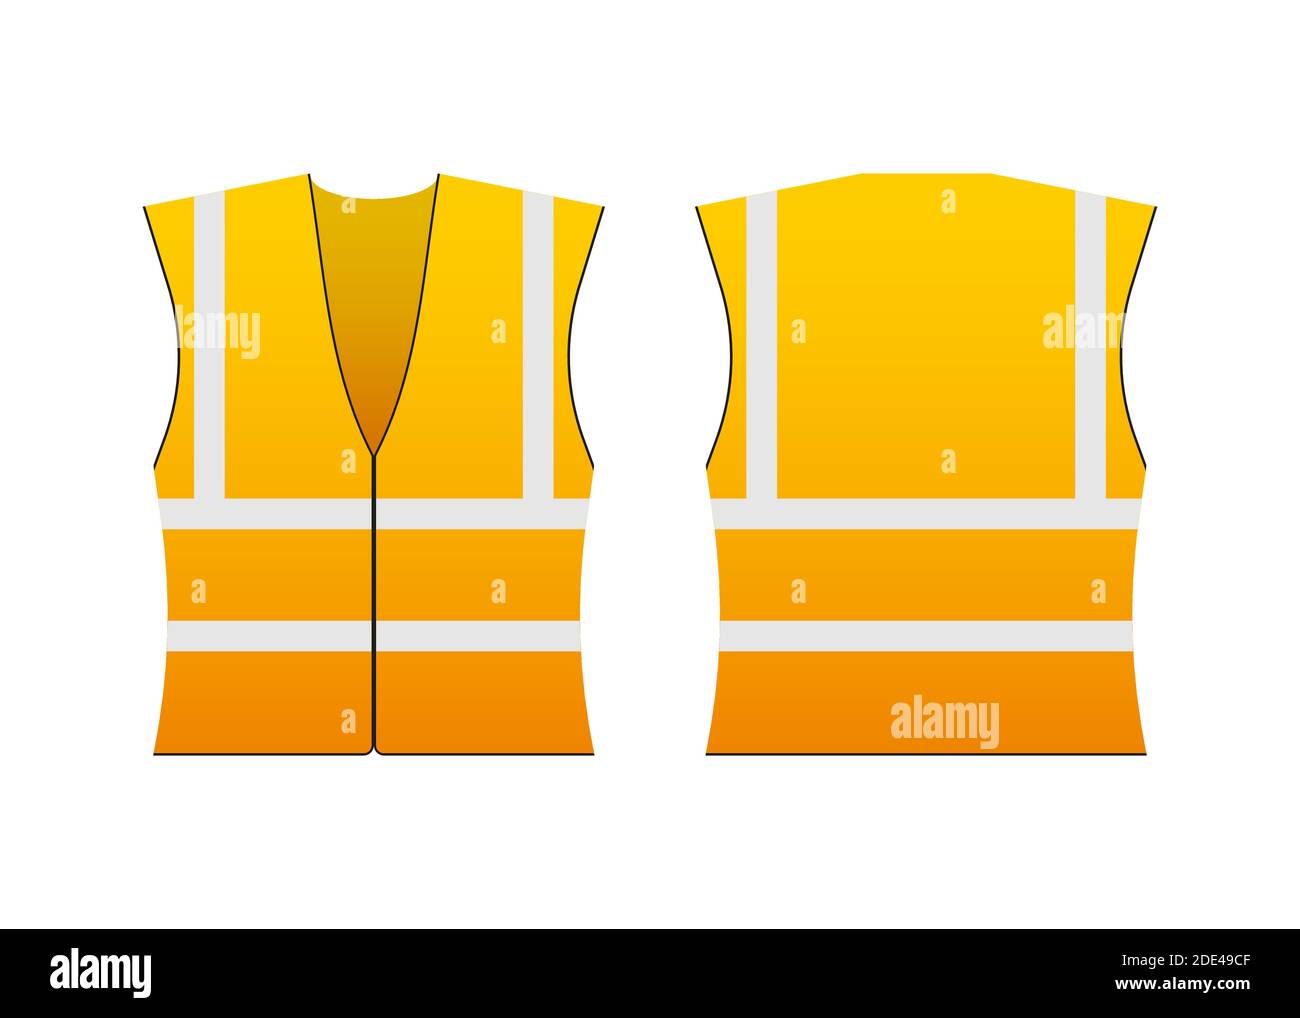 Safety jacket security. Yellow work uniform with reflective stripes. Vector stock illustration. Stock Vector